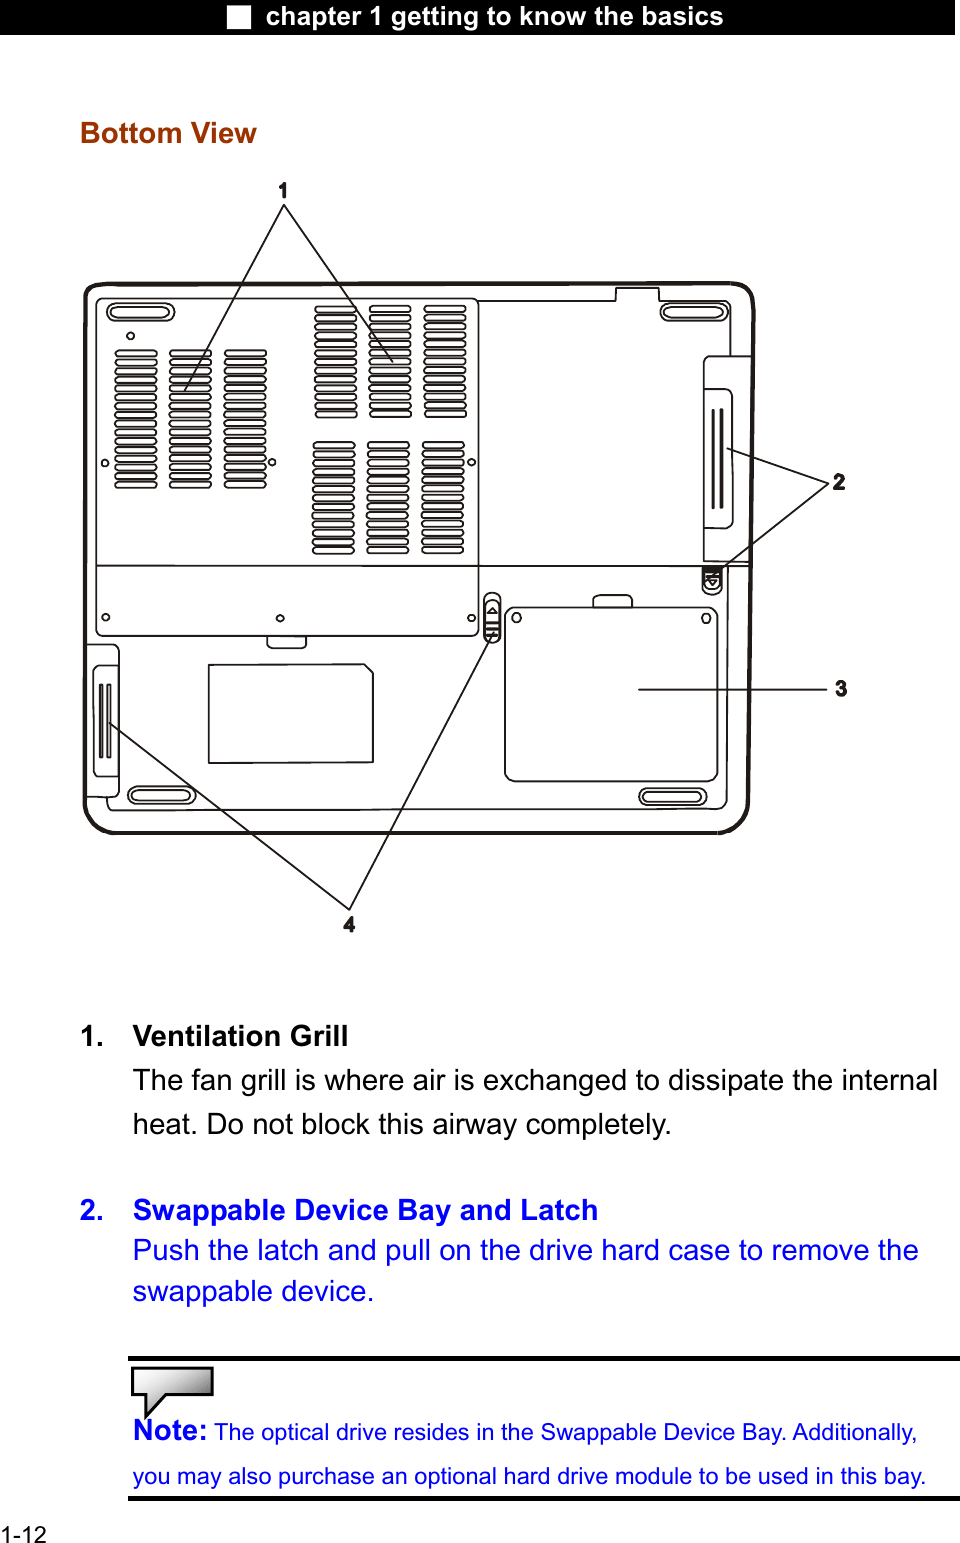 Ϯ chapter 1 getting to know the basicsBottom View1. Ventilation GrillThe fan grill is where air is exchanged to dissipate the internal heat. Do not block this airway completely.2. Swappable Device Bay and Latch Push the latch and pull on the drive hard case to remove the swappable device.Note: The optical drive resides in the Swappable Device Bay. Additionally,you may also purchase an optional hard drive module to be used in this bay.1-12